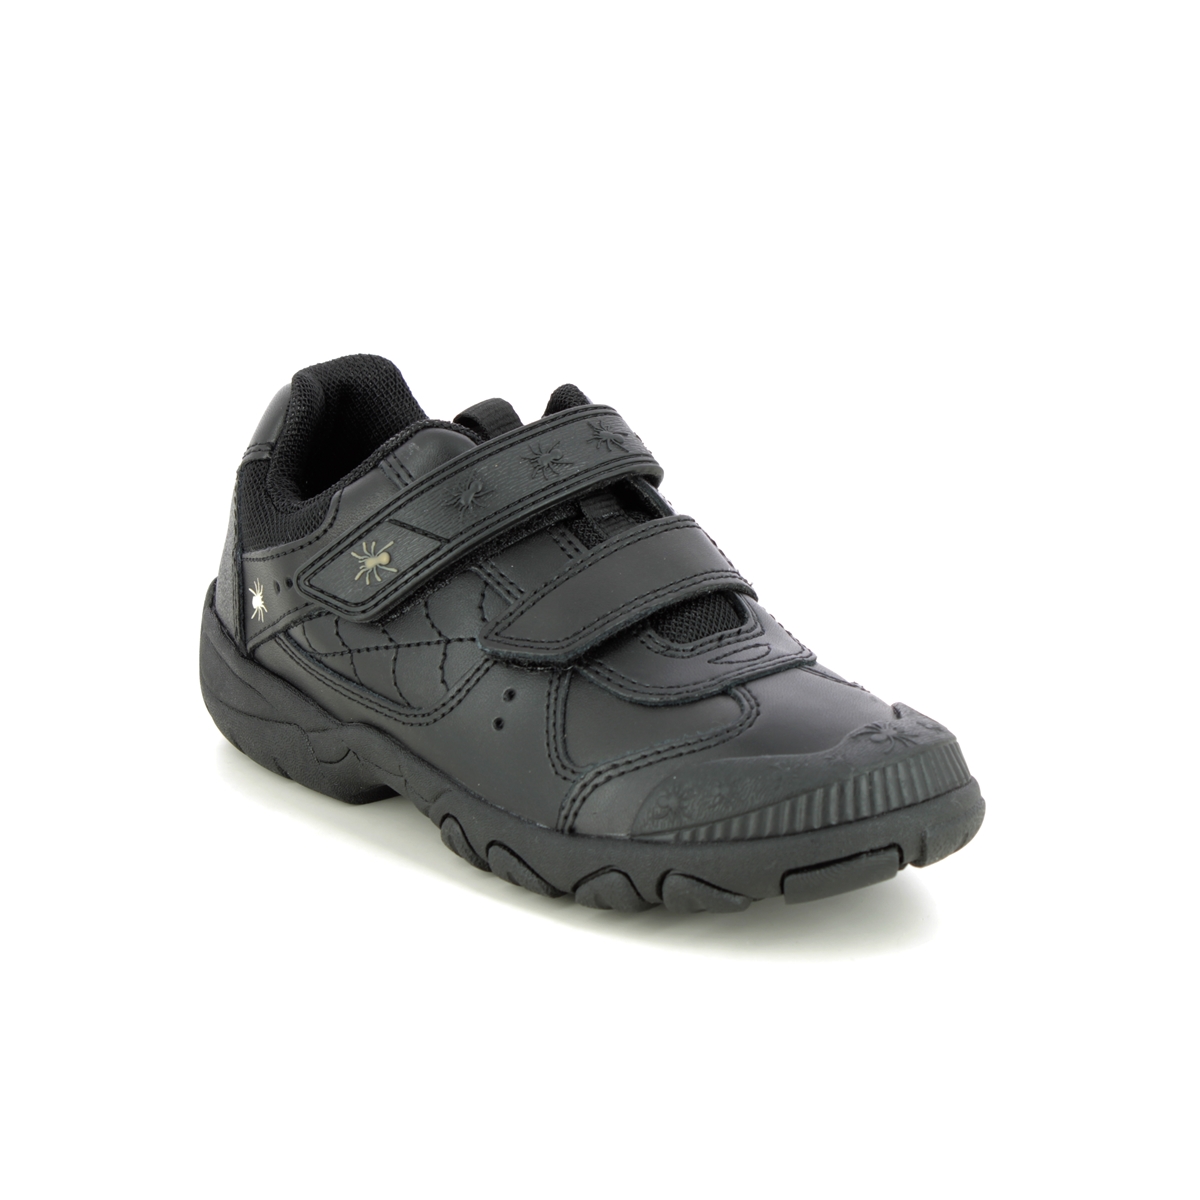 Start Rite - Tarantula In Black Leather 2272-76F In Size 10 In Plain Black Leather For School Boys Shoes  In Black Leather For kids